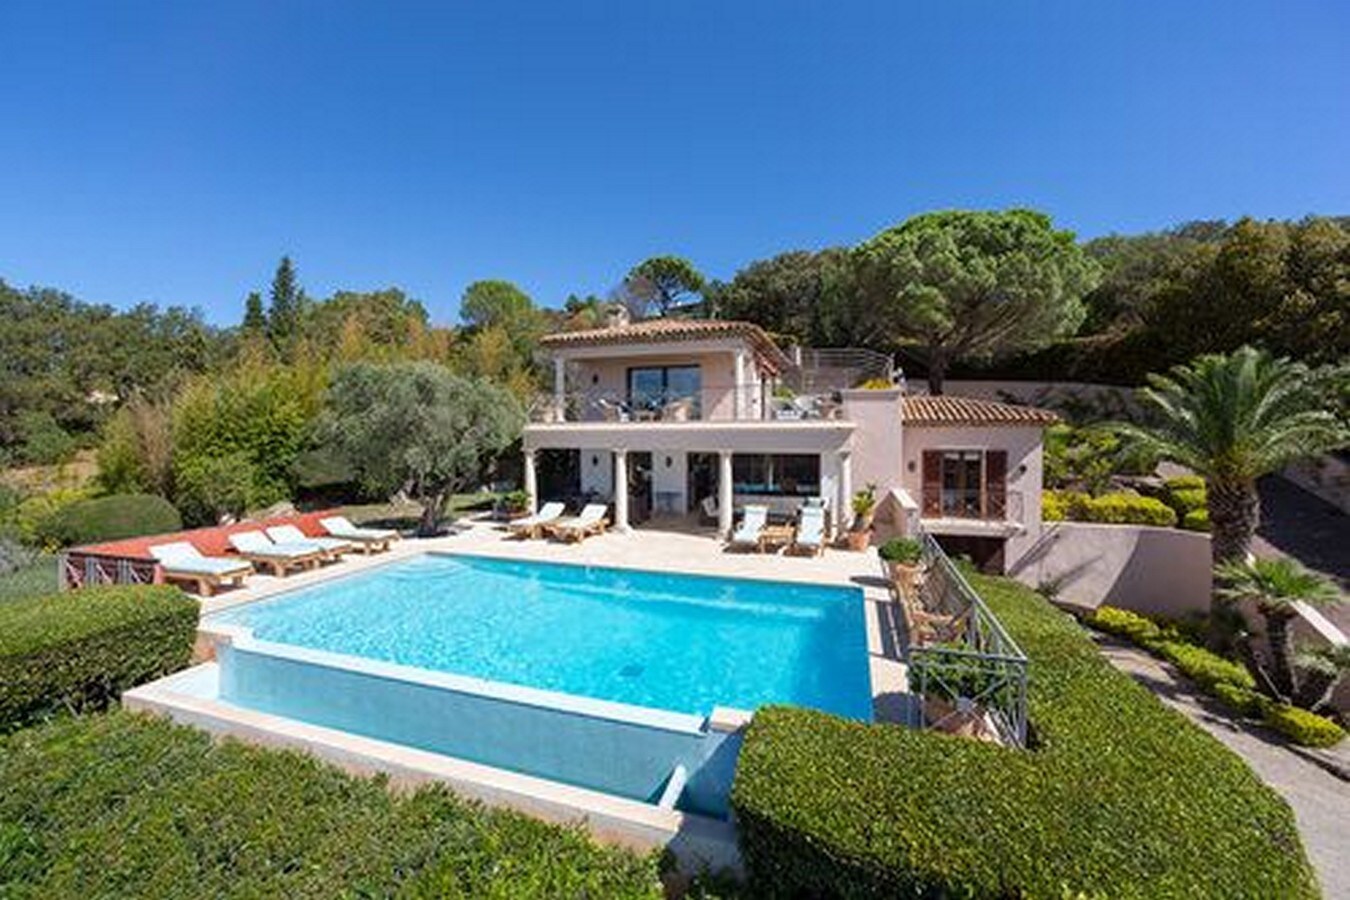 Property Image 1 - Fabulous 5-bedroom villa with AC, pool and beautiful views to Porquerolles